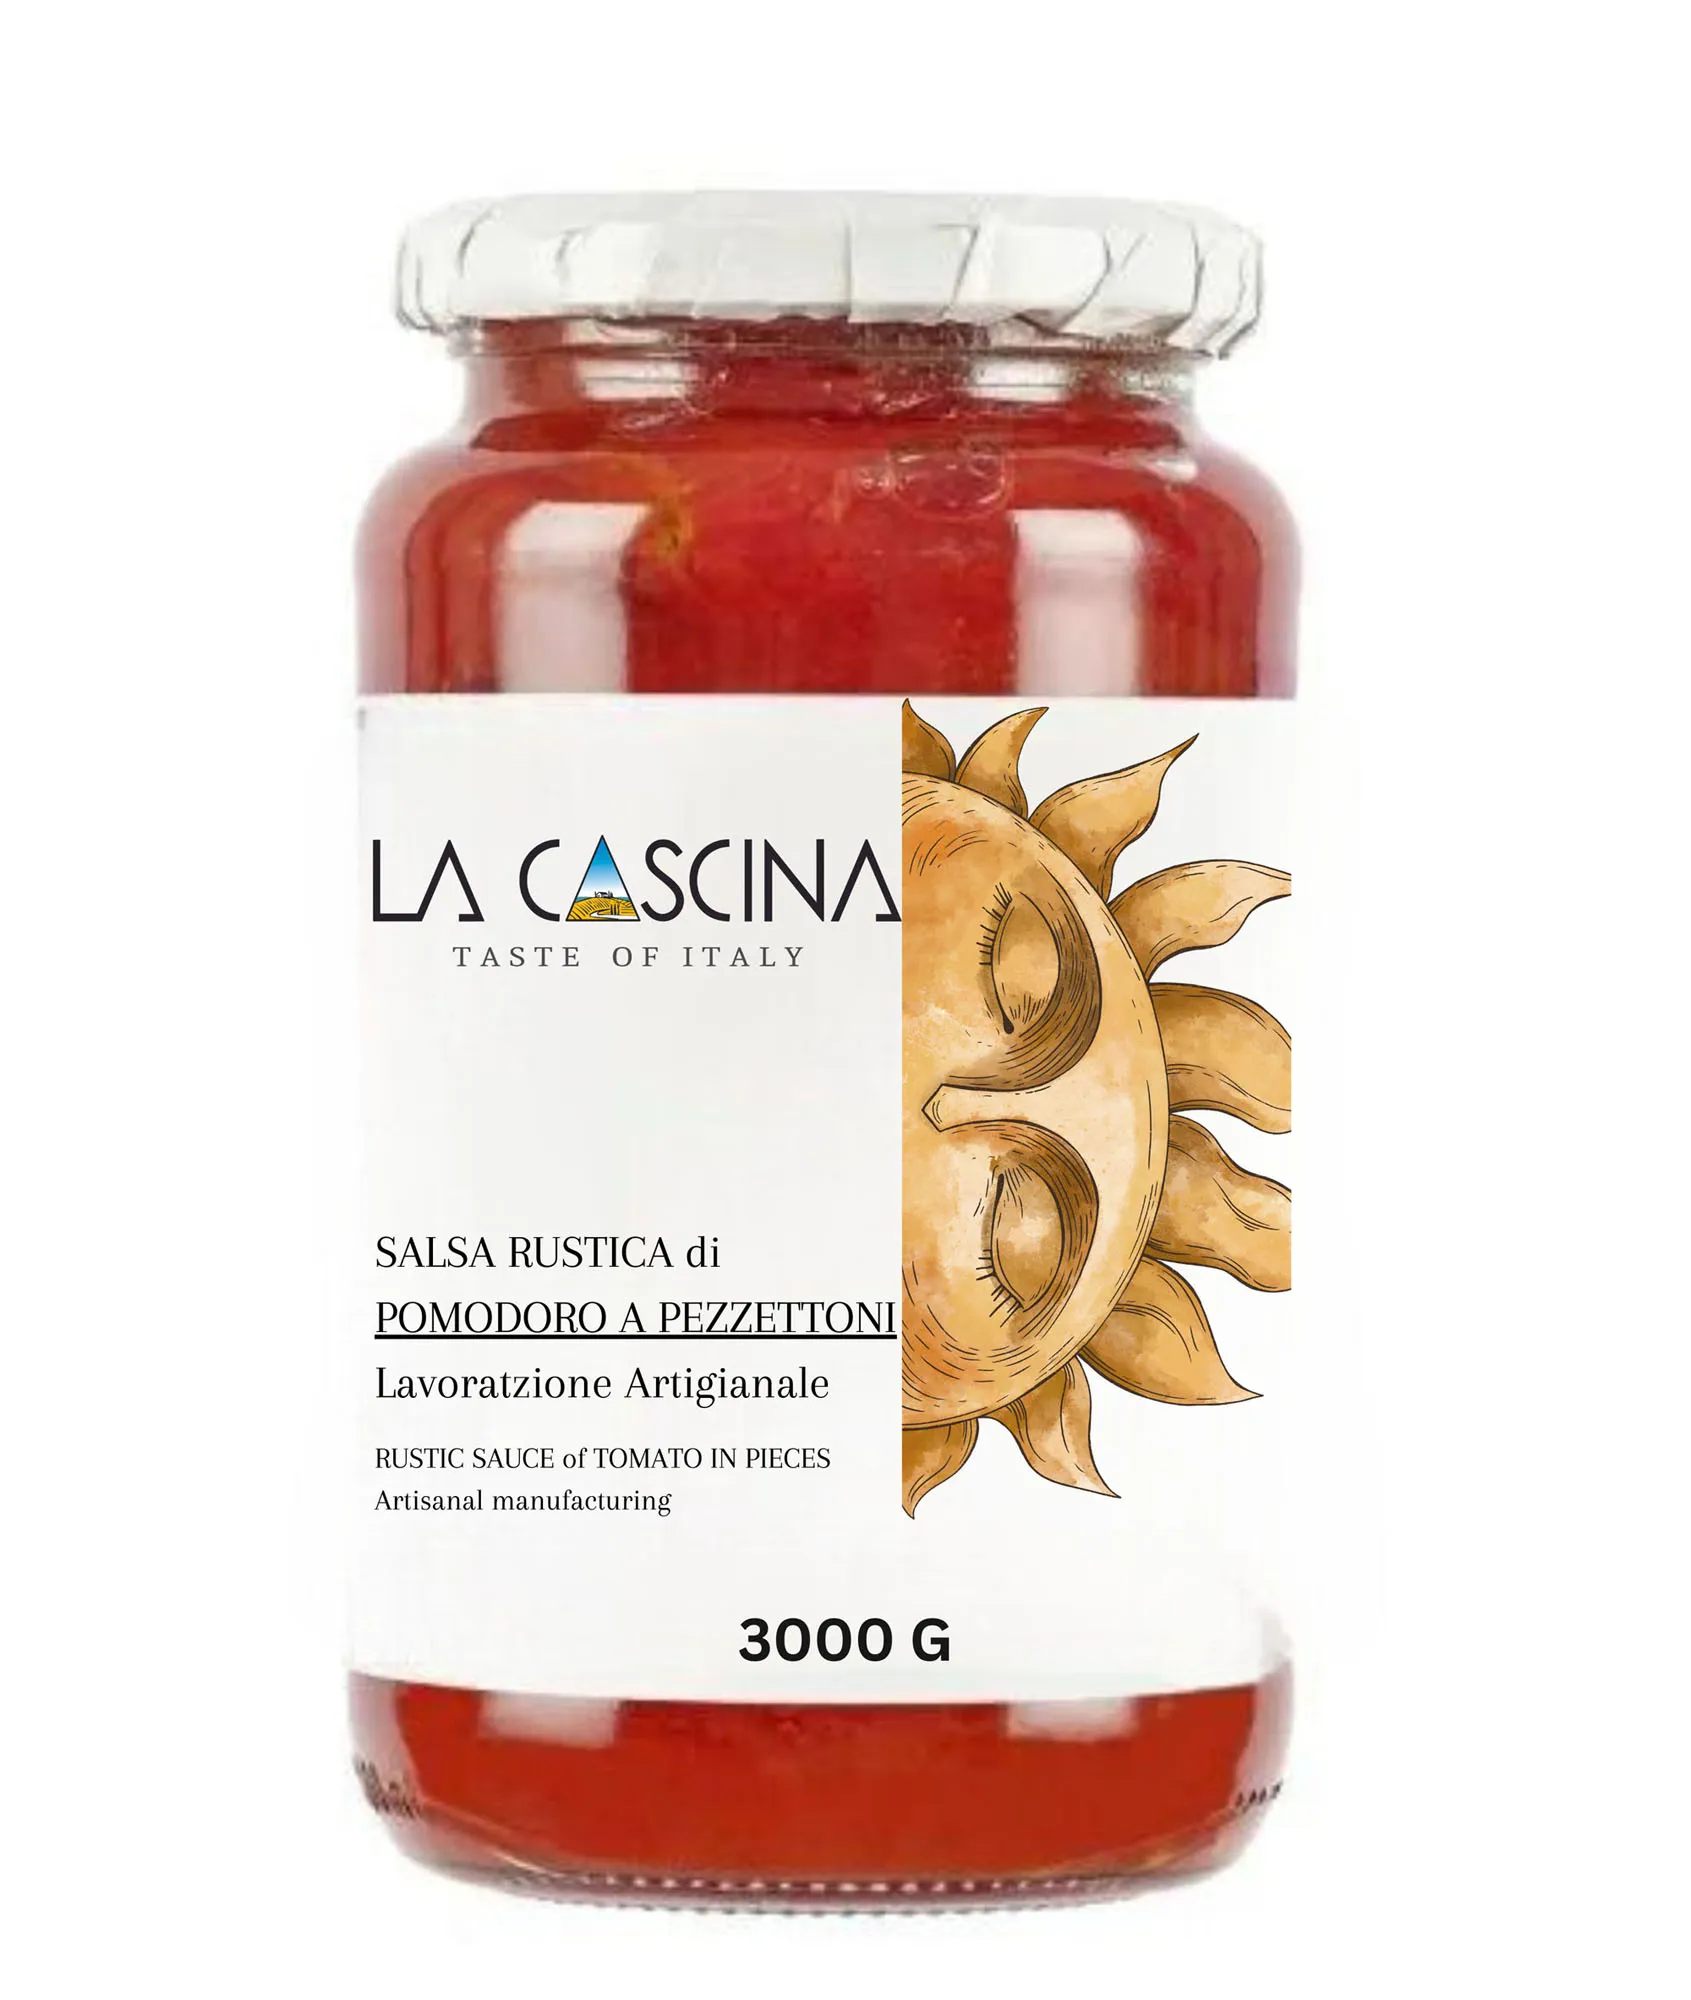 Rustic tomato sauce in small pieces 3000 gr